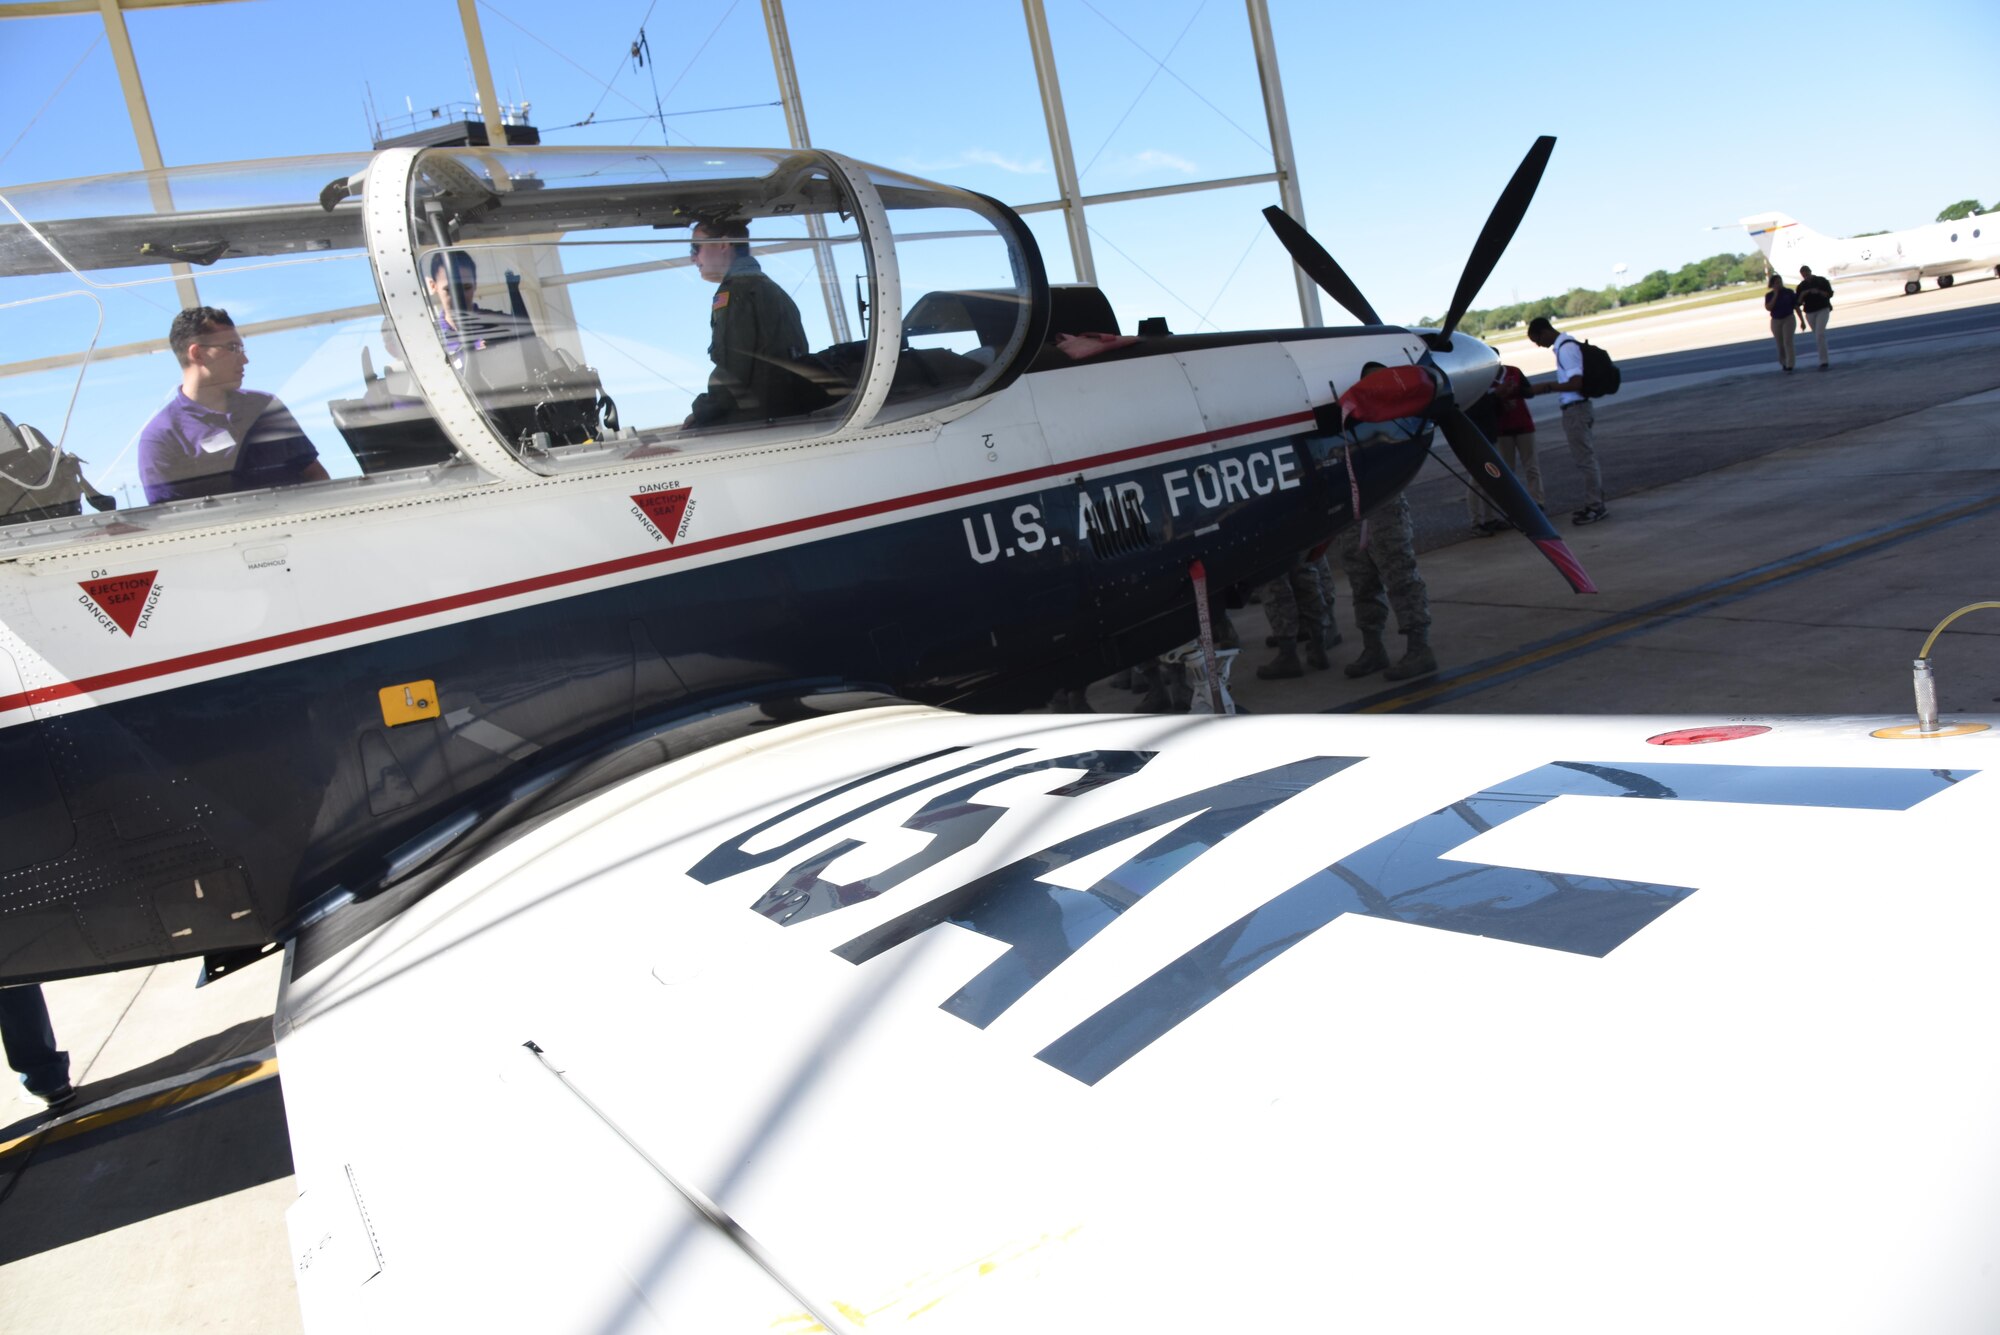 Air Force ROTC cadets view a T-6 Texan 2 static display during Pathways to Blue April 7, 2017, on Keesler Air Force Base, Miss. Pathways to Blue, an annual event hosted by 2nd Air Force with the support of the 81st Training Wing and the 403rd Wing, allowed cadets to receive hands-on briefings with technical and flying operations and an orientation flight in support of the Air Force's Diversity Strategic Roadmap program. (U.S. Air Force photo by Kemberly Groue)